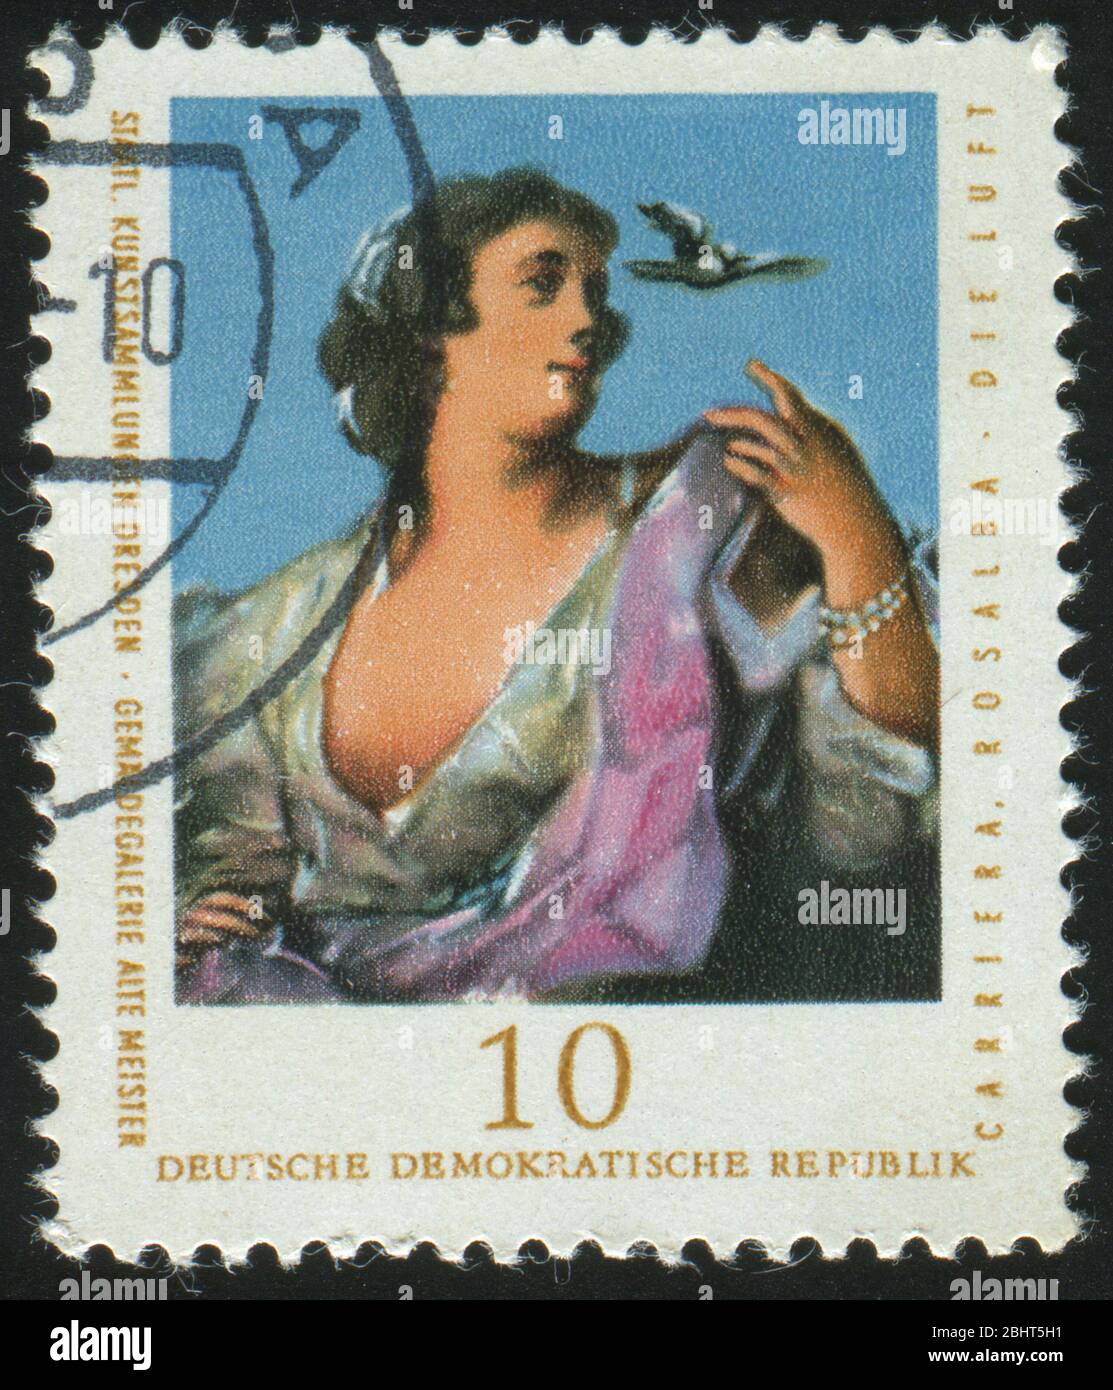 GERMANY - CIRCA 1976: stamp printed by Germany, shows Air, by Rosalba Carriera, circa 1976. Stock Photo